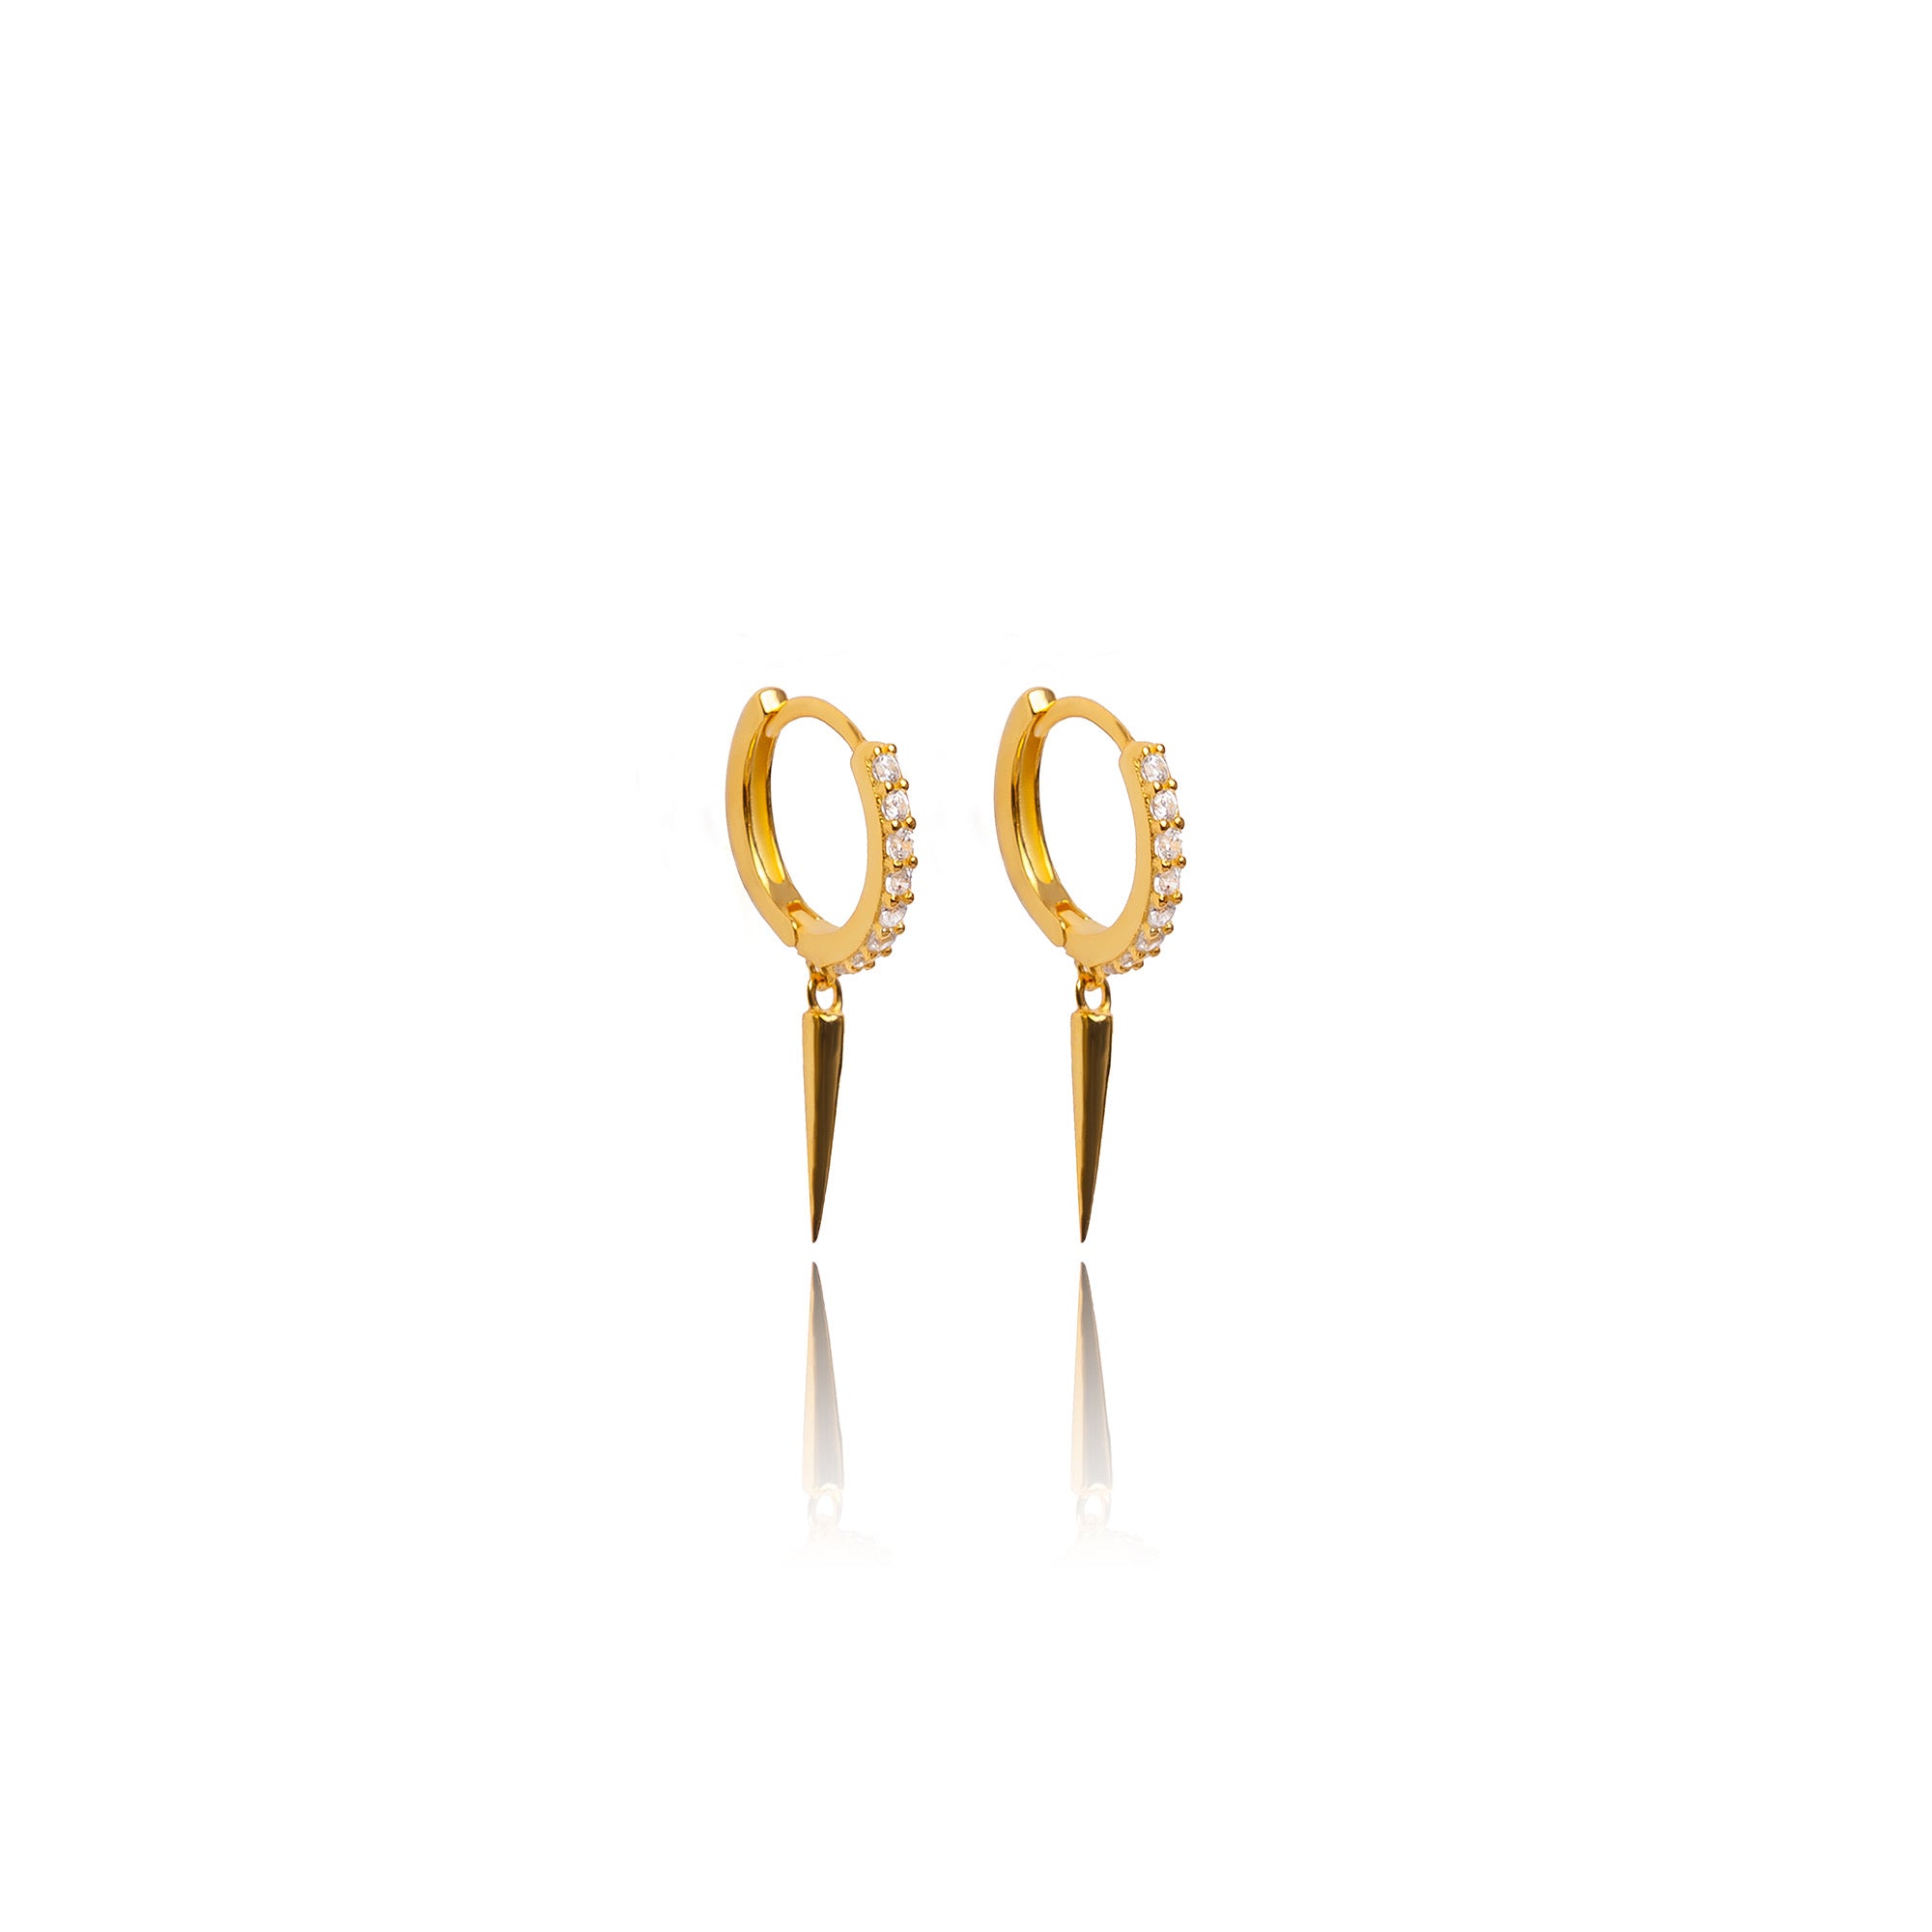 Our lightweight huggies make it easy and comfortable to wear.  It is very nice earring for the girl who love light earring.  18k gold plated on 925 sterling silver. Inner diameter: 8.05mm Length: 22.2mm This product is hypoallergenic and tarnish resistant.